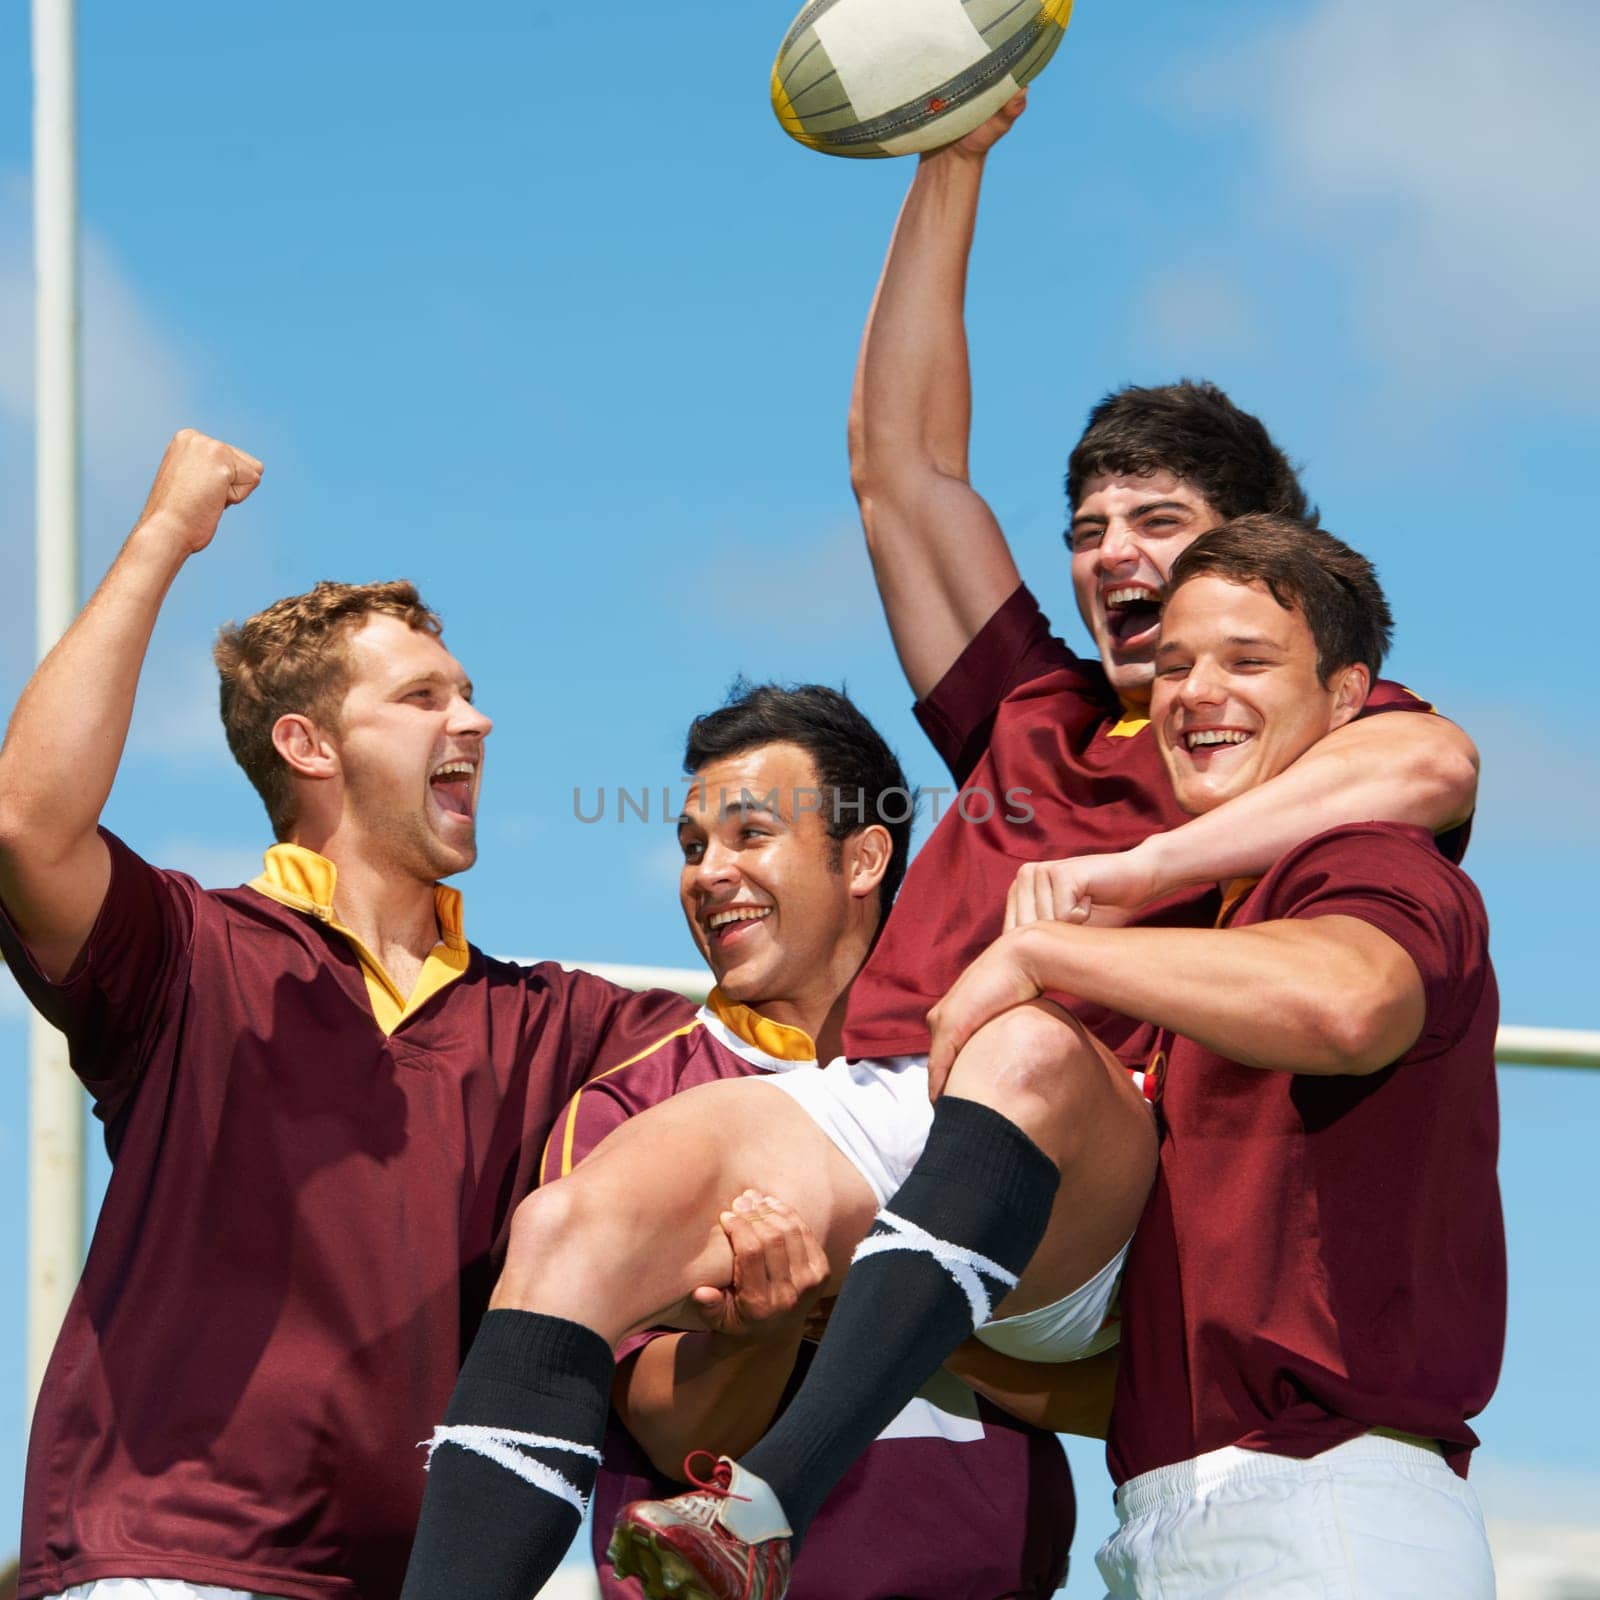 Winner, victory and rugby with a team in celebration together outdoor after a game or competition. Fitness, sports and energy with a winning man athlete group celebrating scoring a try or success by YuriArcurs